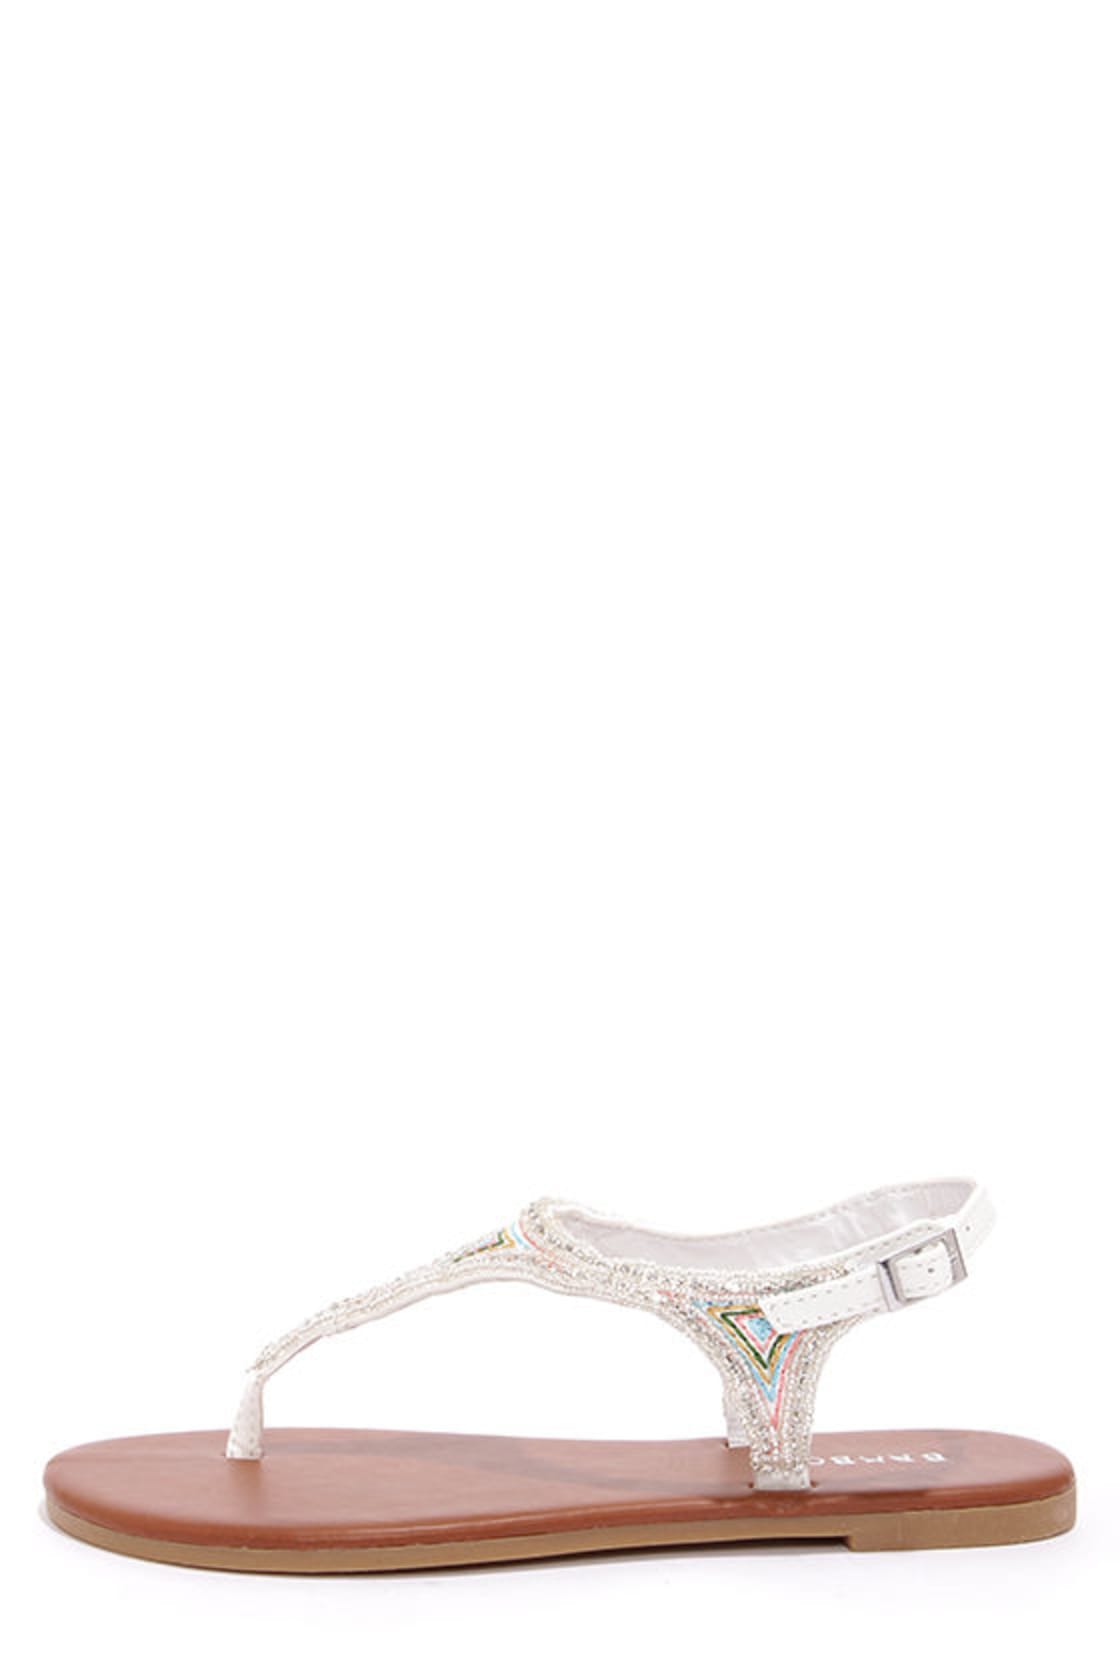 Cute White Sandals - Beaded Sandals - Thong Sandals - $28.00 - Lulus